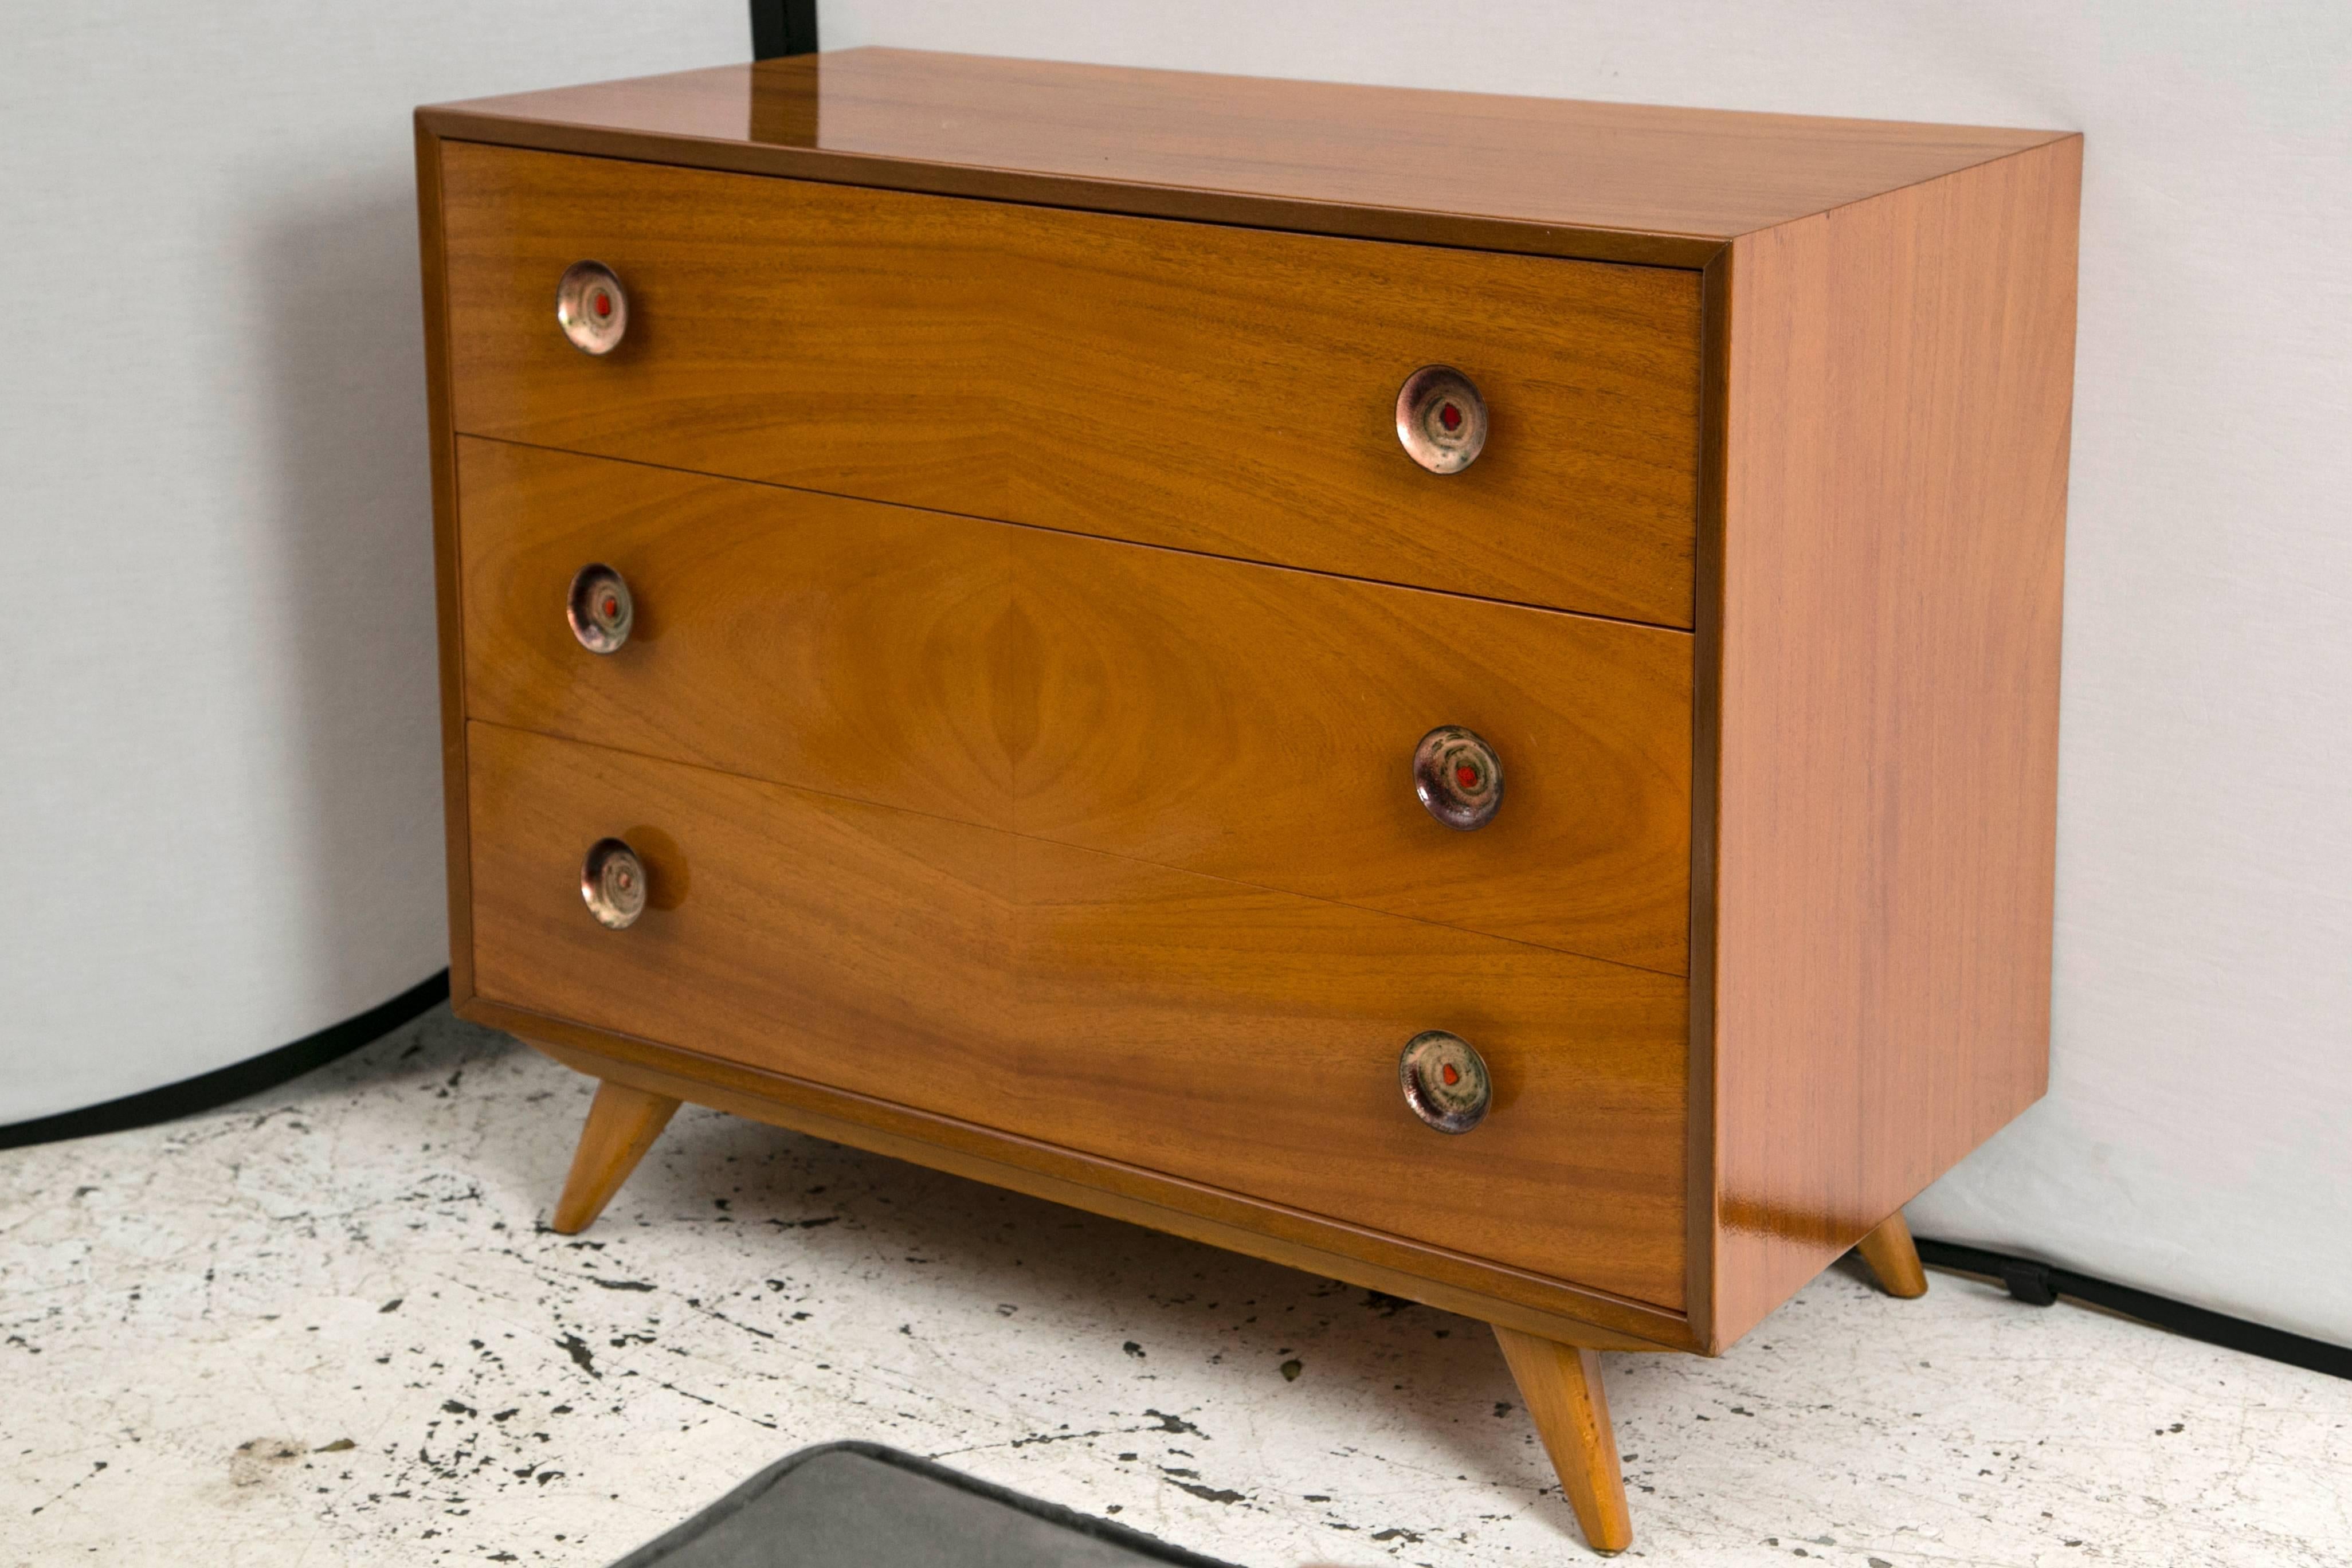 Hand-Crafted Women's Dresser by J.O. Carlssons, Sweden